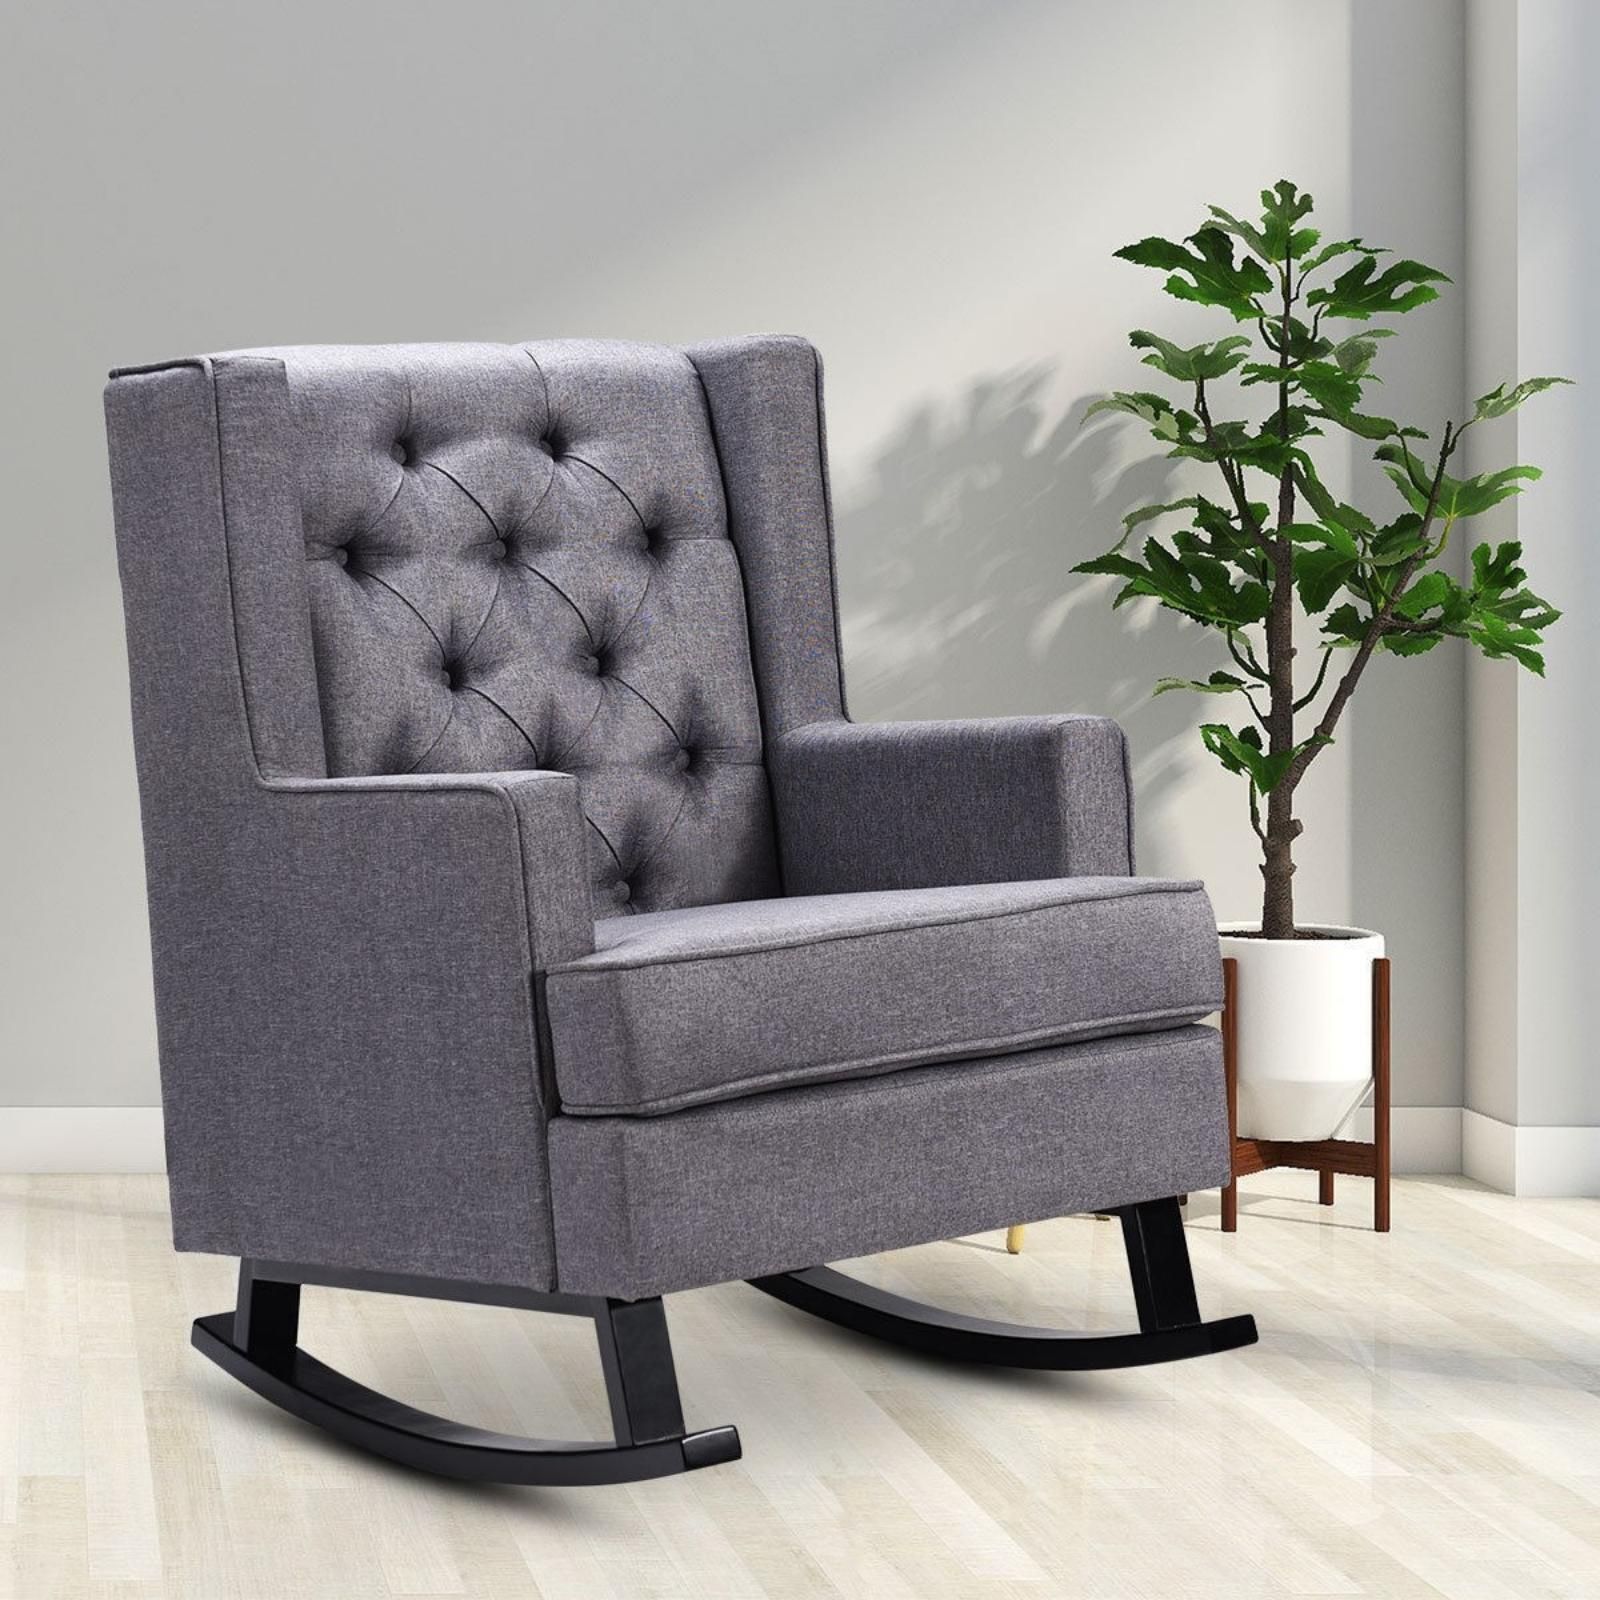 Modern Rocking Chair Recliner Dark Grey Cushioned Fabric Throughout Dark Wood Outdoor Reclining Chairs (View 11 of 15)